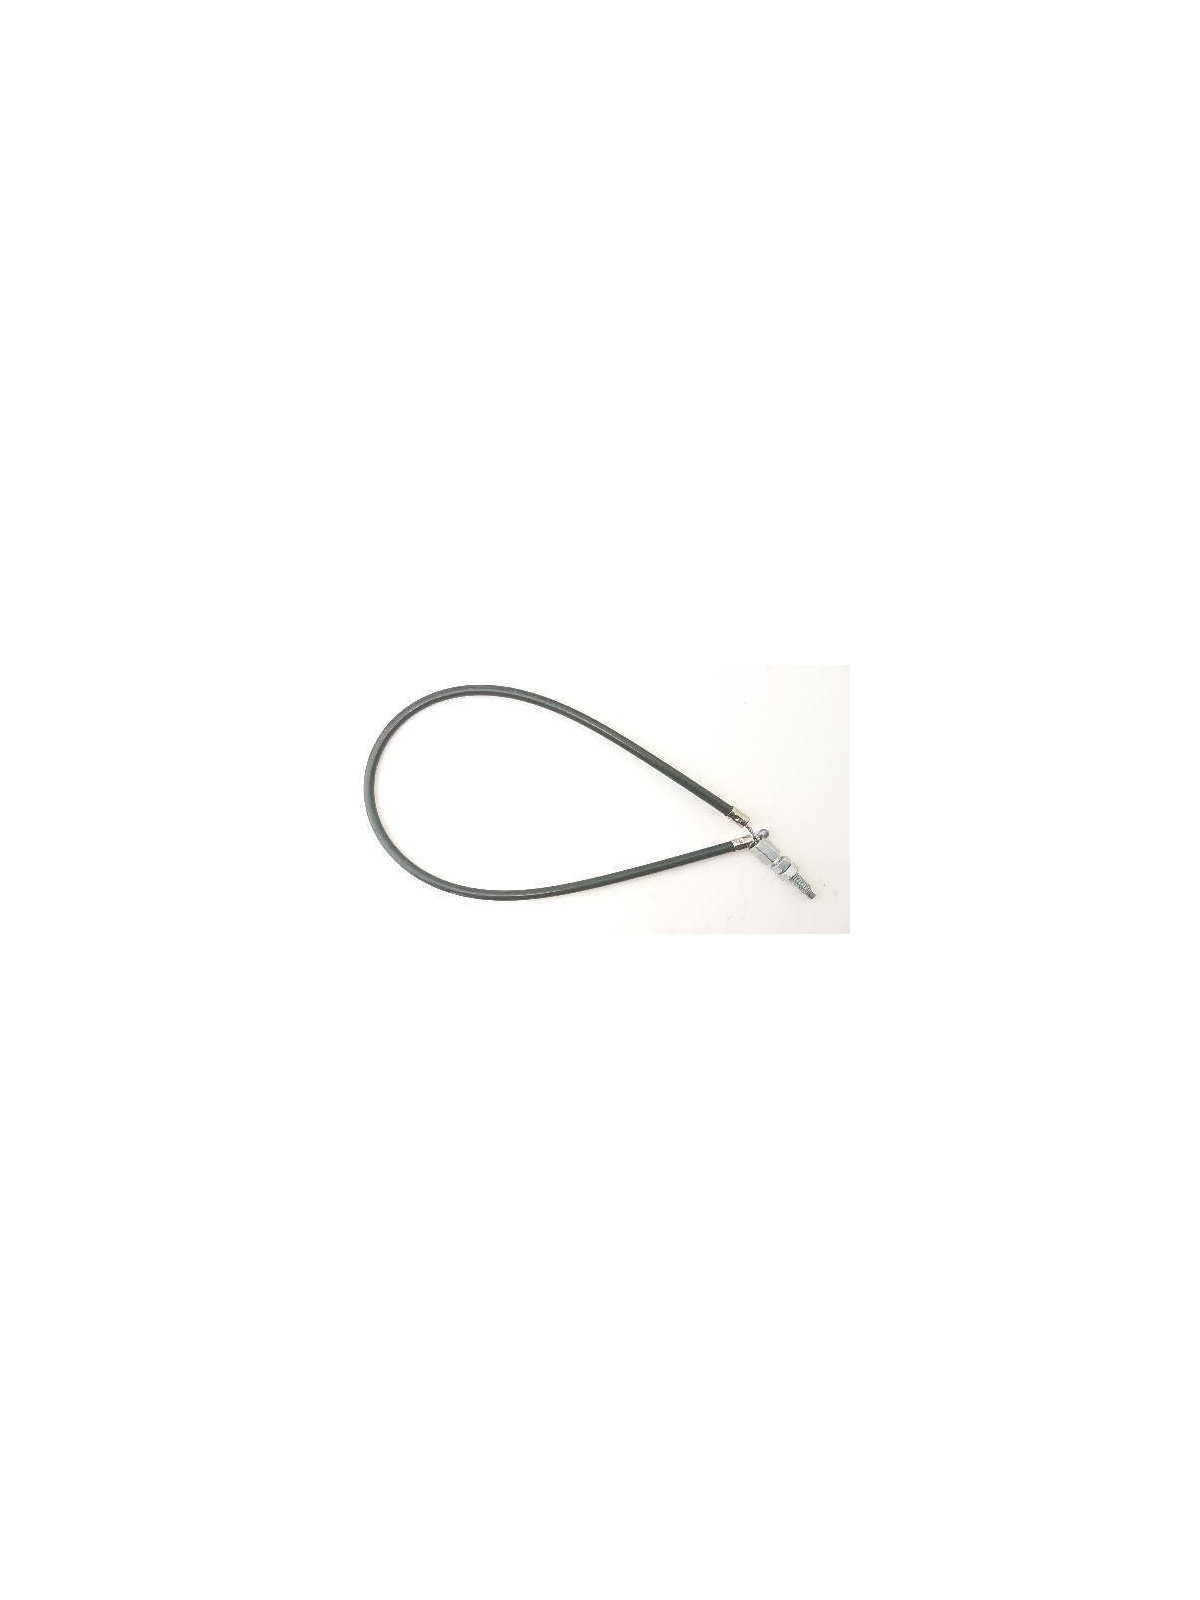 4345024 BRAKE CABLE ASS'Y Virutex | JVL-Europe